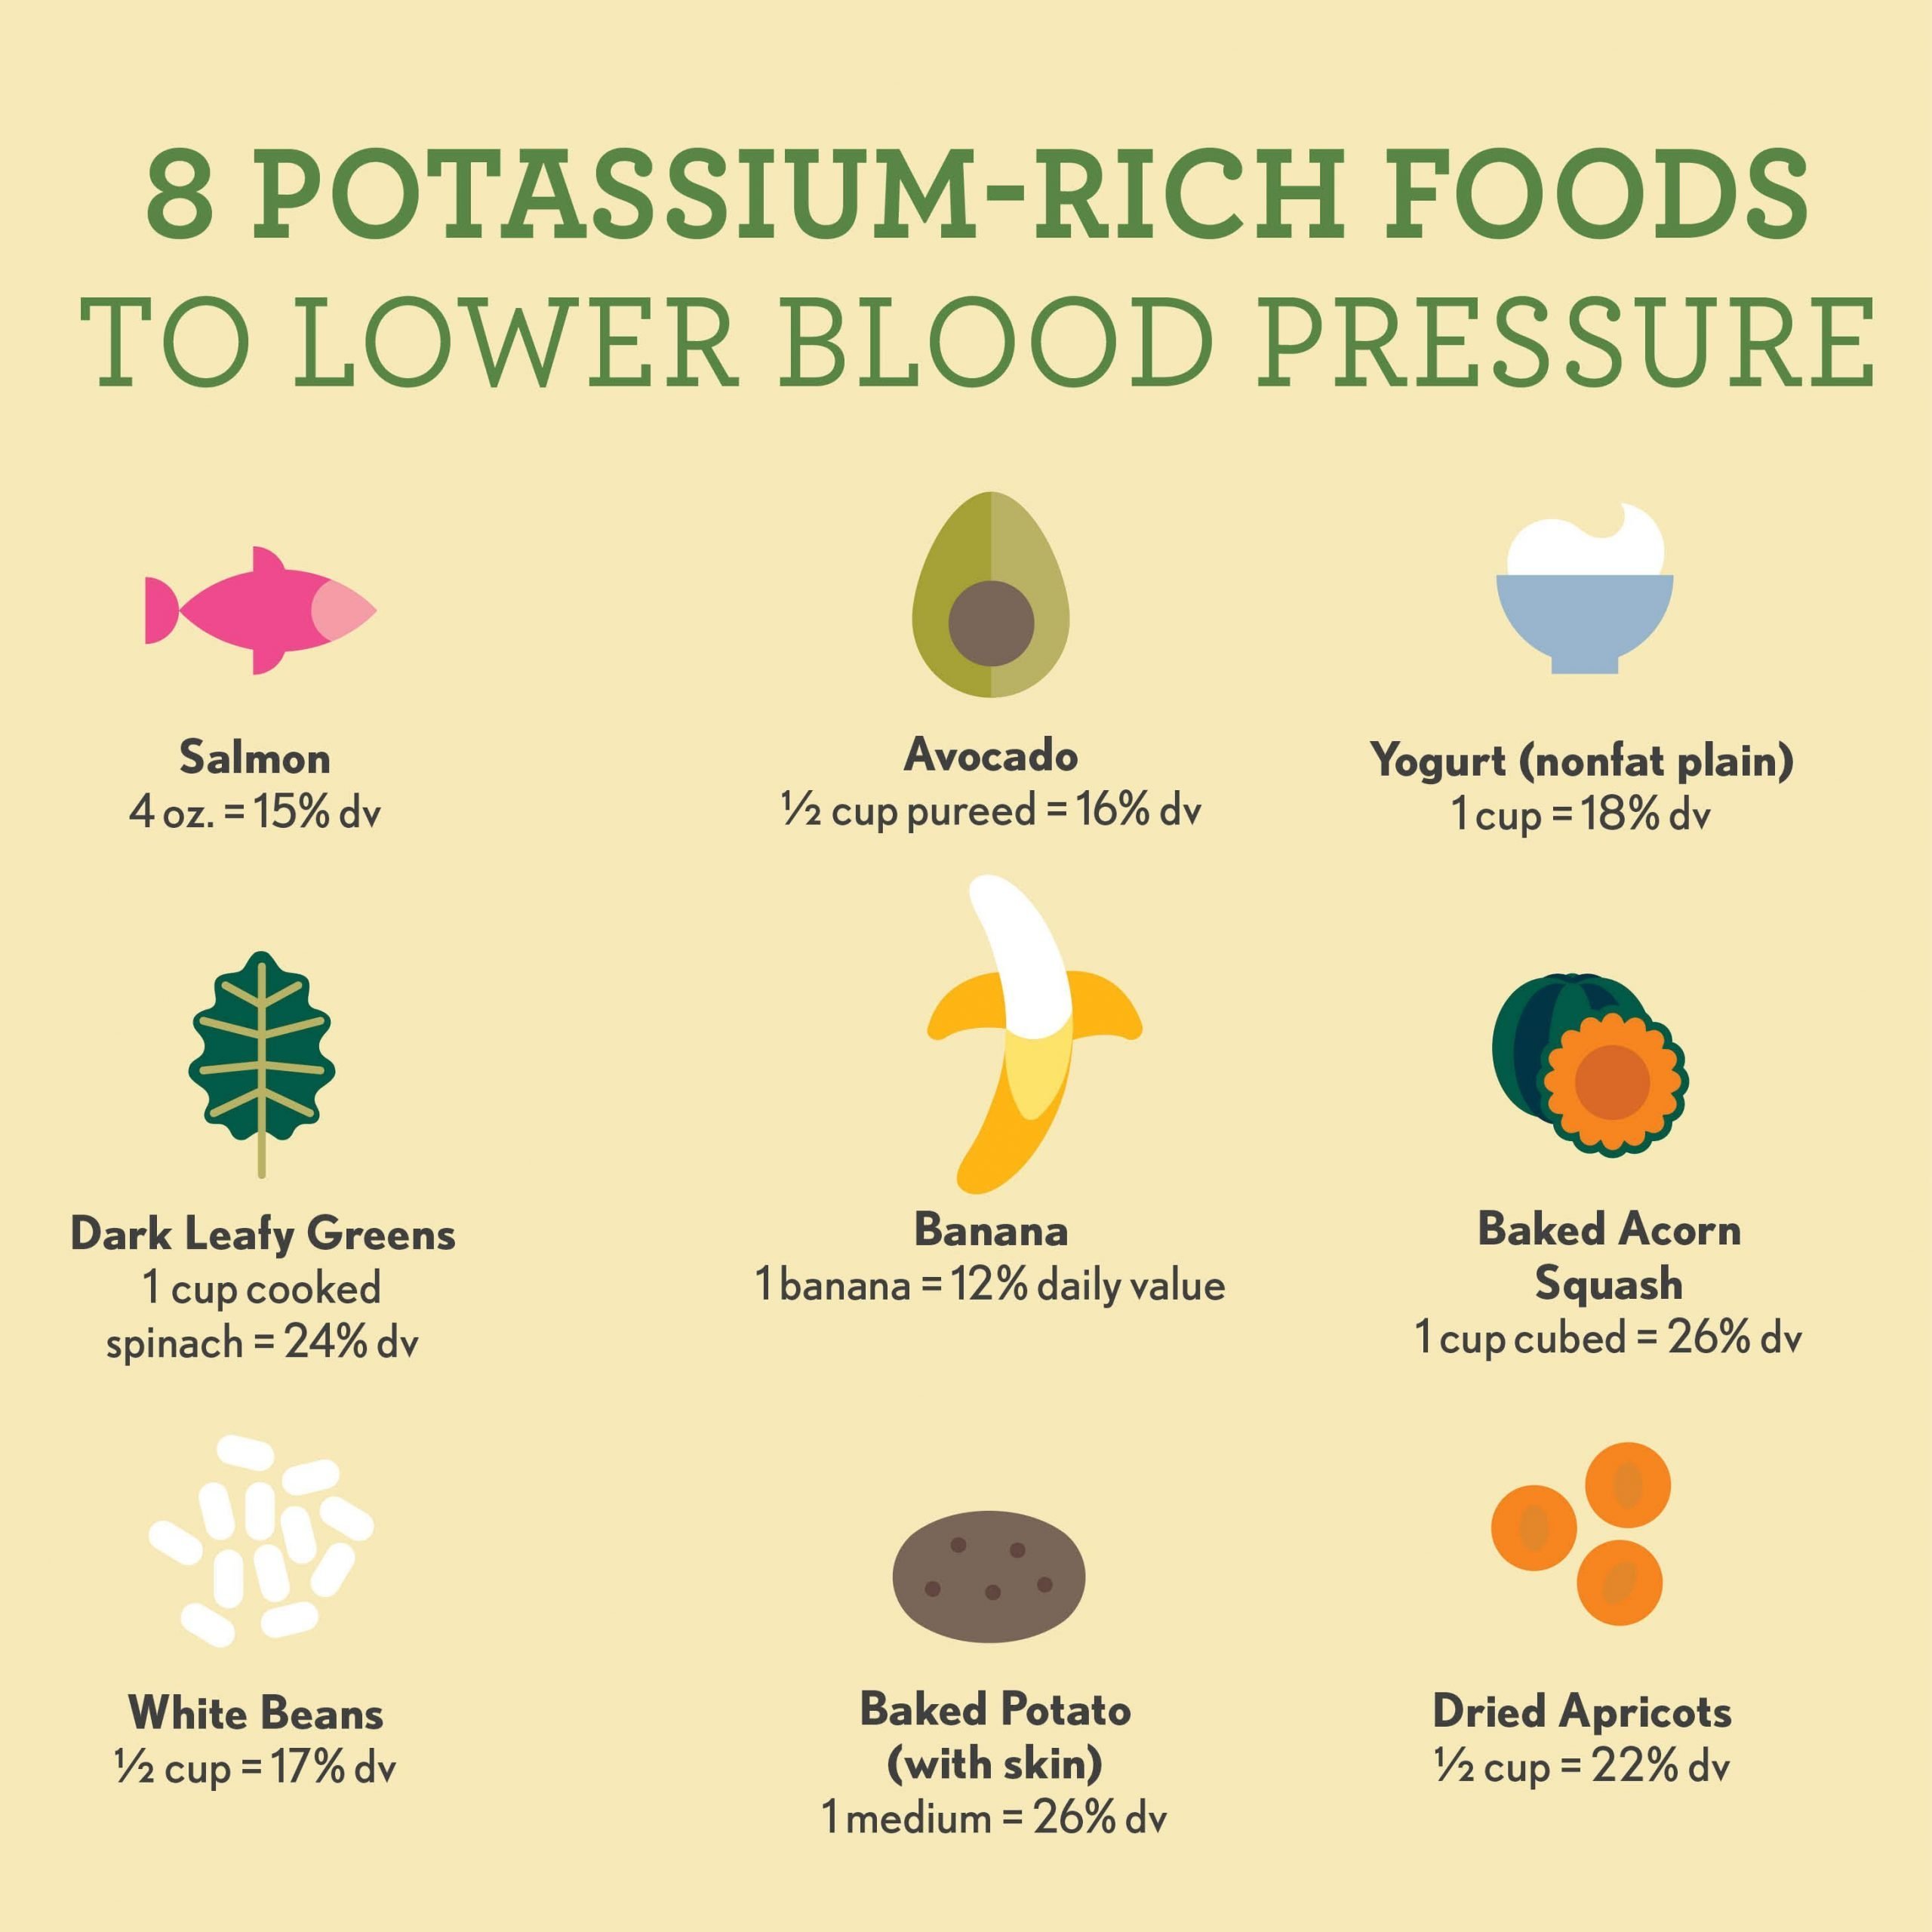 8 Great Ways to Lower Blood Pressure: Sodium Aside